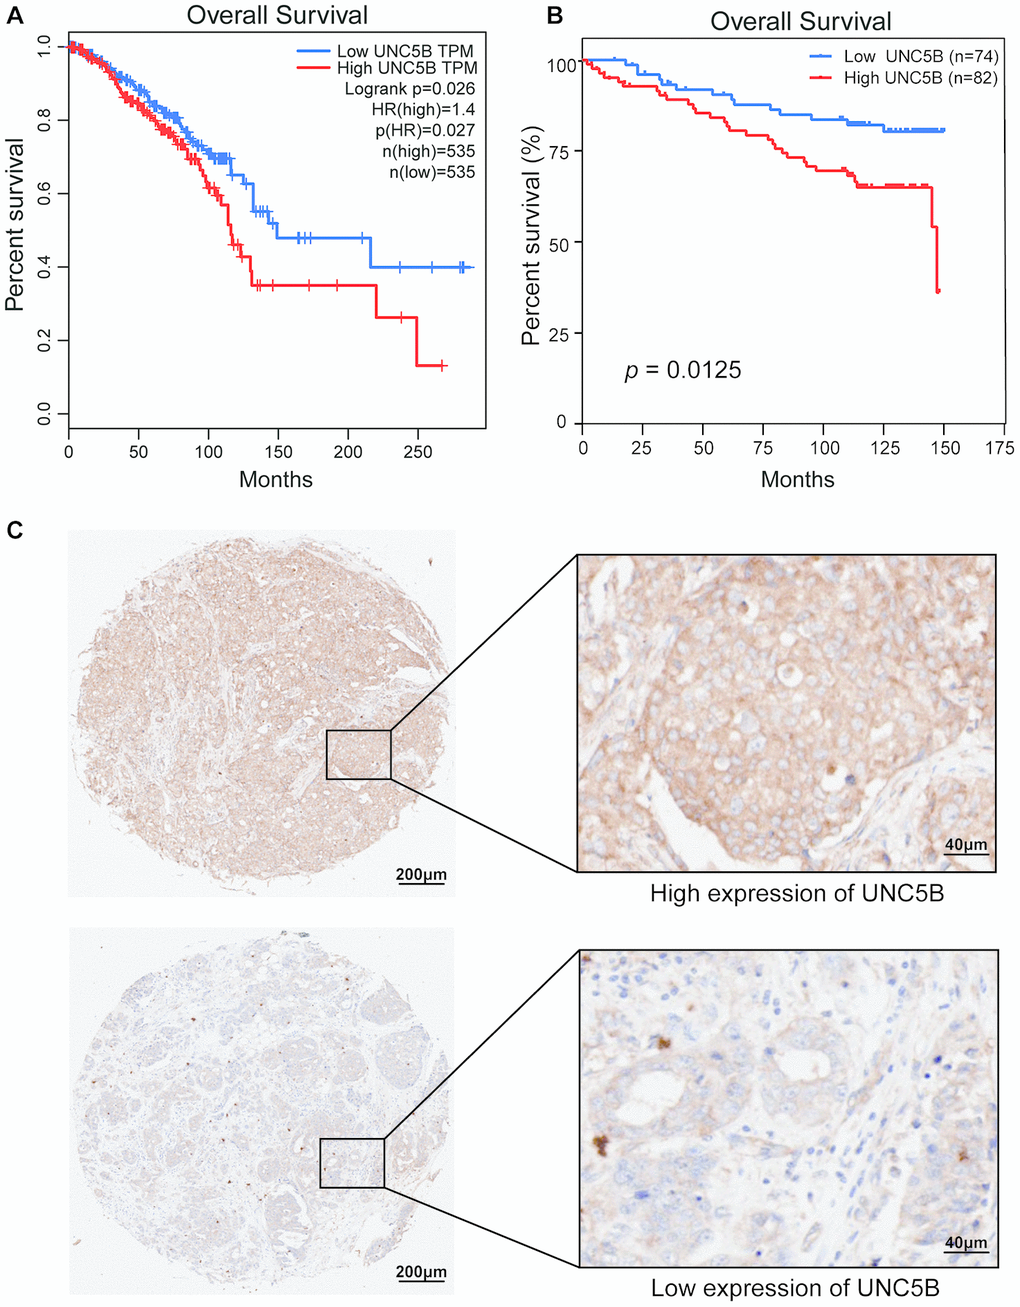 The prognostic value of UNC5B expression in breast cancer (GEPIA and IHC). (A) The prognostic value of UNC5B mRNA expression in breast cancer patients, analyzed by GEPIA. (B) The prognostic value of UNC5B protein expression in breast cancer patients. (C) Representative IHC images of high expression and low expression of UNC5B in breast cancer tissues.